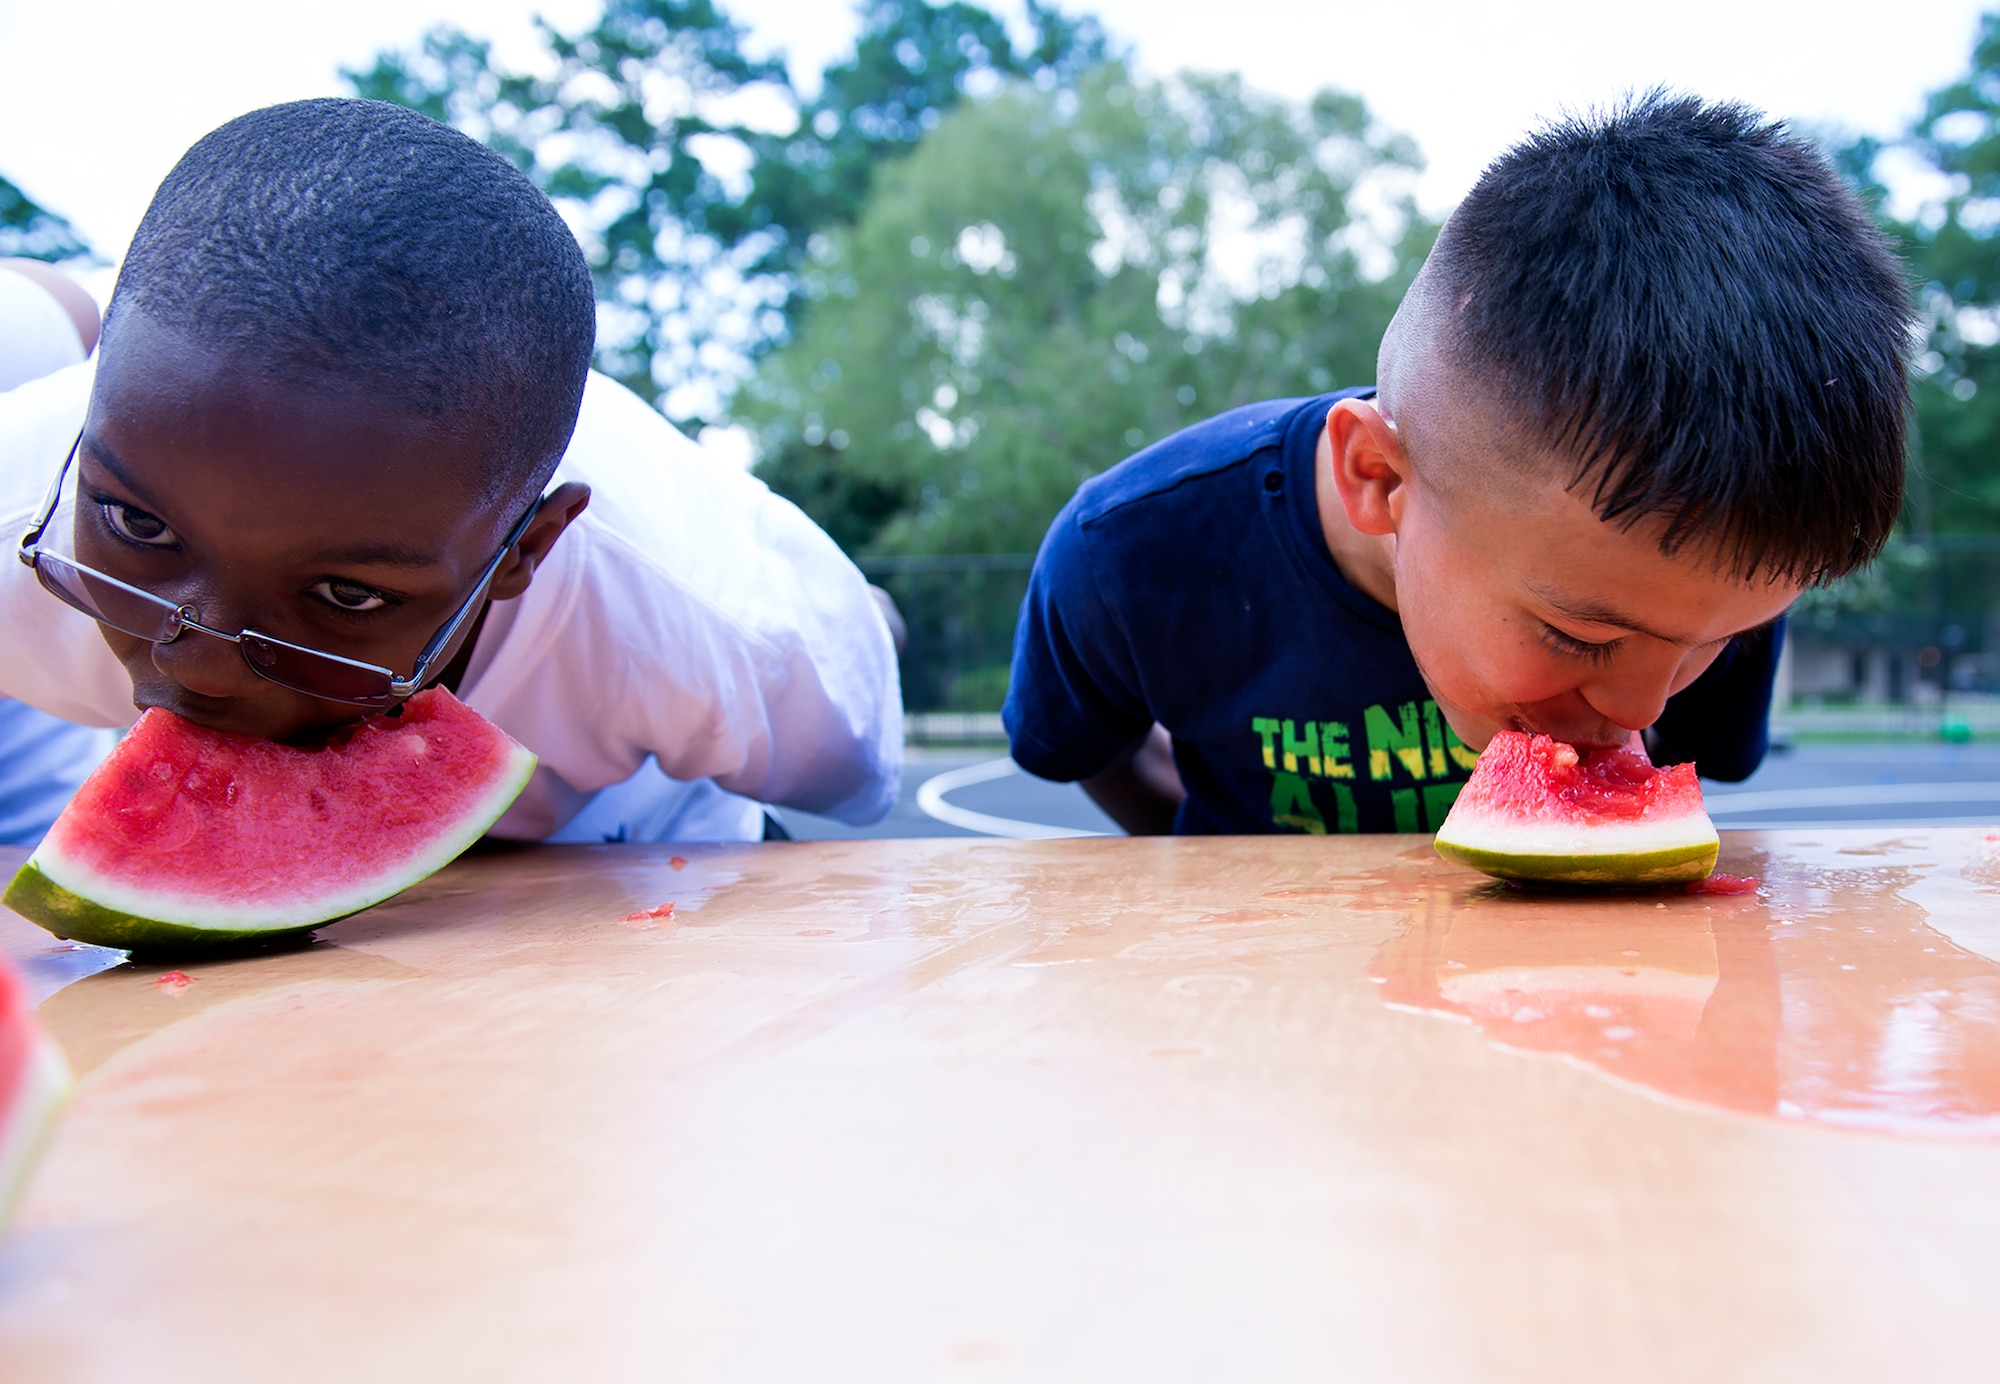 Omar Montgomery, left, son of Chelsea Montgomery, 23d Force Support Squadron, and Victor Garza III, son of U.S. Air Force Tech. Sgt. Victor Garza Jr., 723d Aircraft Maintenance Squadron, compete in a watermelon-eating contest during the July Jamboree, July 6, 2015, at Moody Air Force Base, Ga. The annual event also consisted of kickball games, water-balloon fights, three-legged races and a slip-and-slide bounce house. (U.S. Air Force photo by Airman Greg Nash/Released)